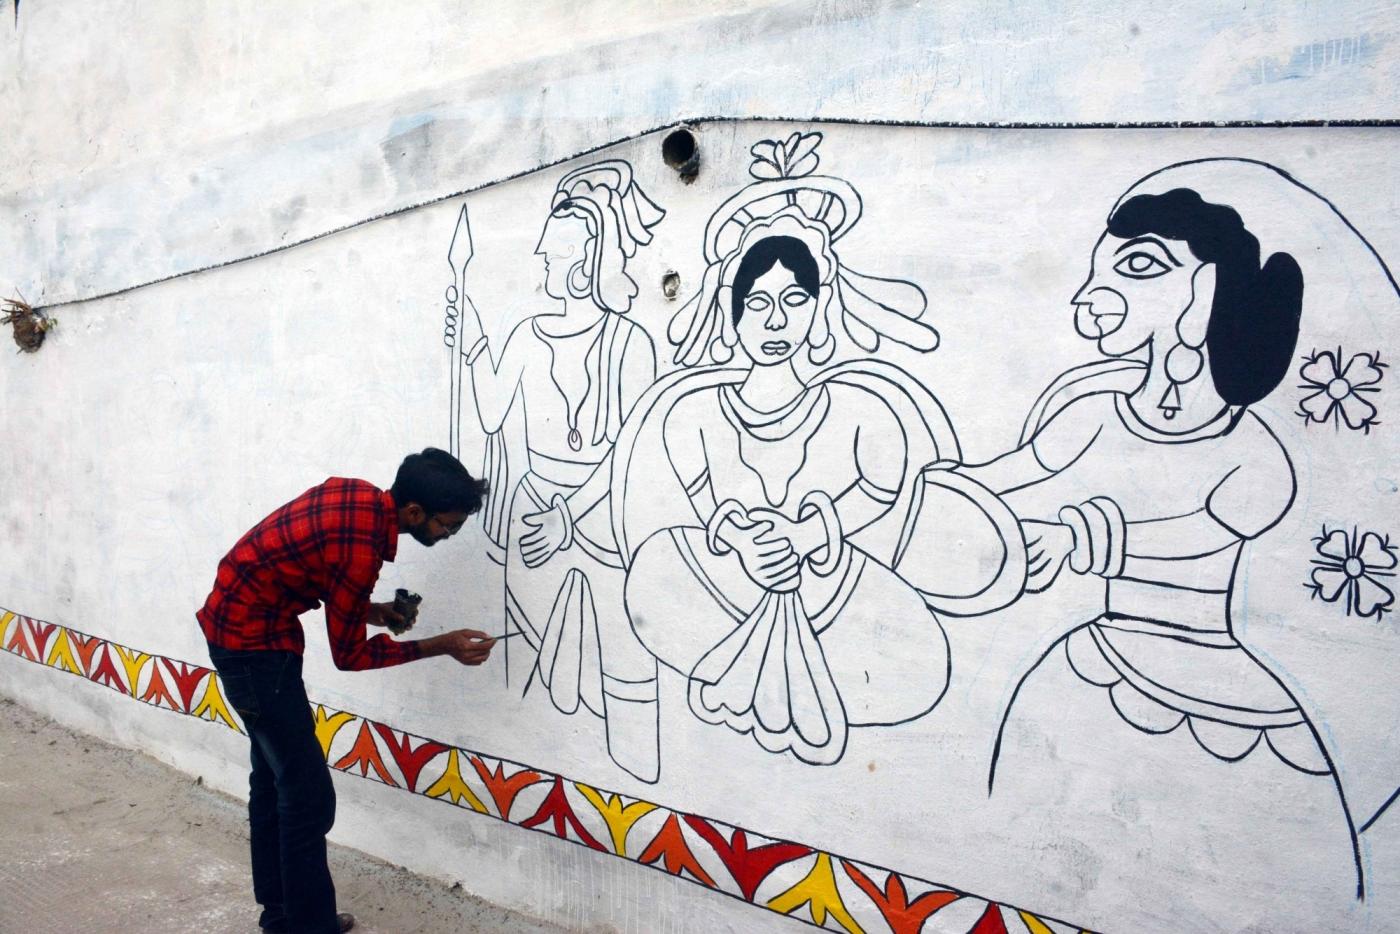 Patna: An artist decorates a wall with Madhubani art at Kali Ghat ahead of Chhath Puja in Patna, on Nov 10, 2018. (Photo: IANS) by .